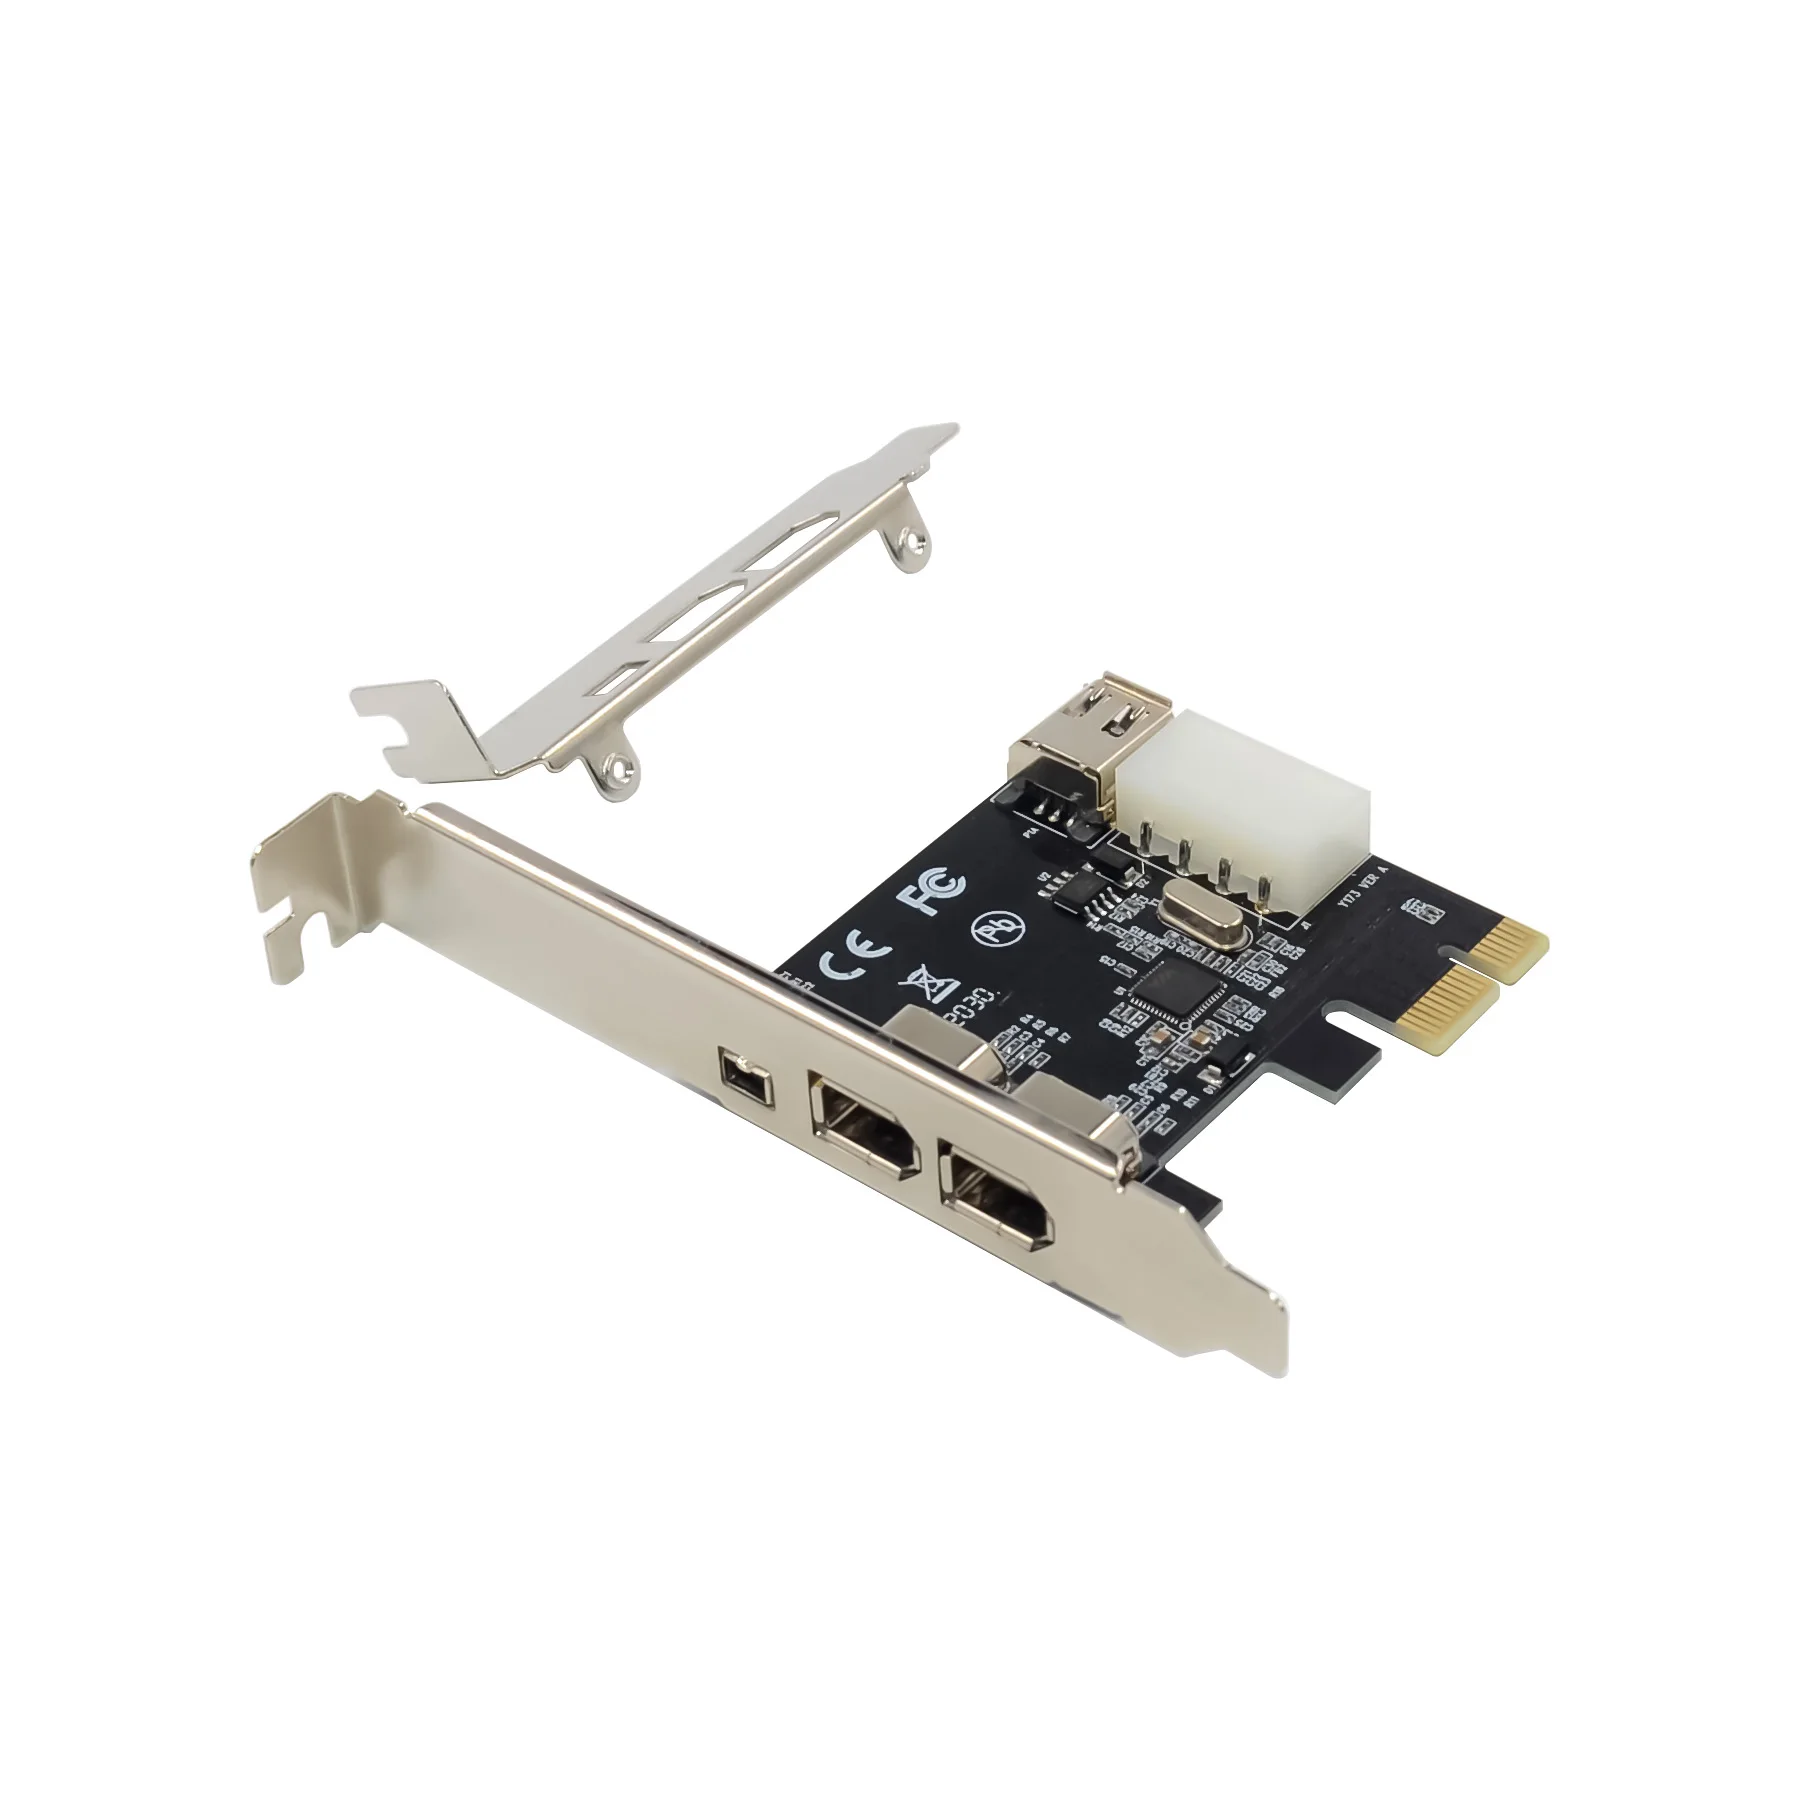 

PCIe X1 4 Ports Firewire 4pin 9pin Expansion Card PCI Express 1394B 1394A VIA VT6315 Chipset Adapter PCI-E 1X to 1394 Soundcard